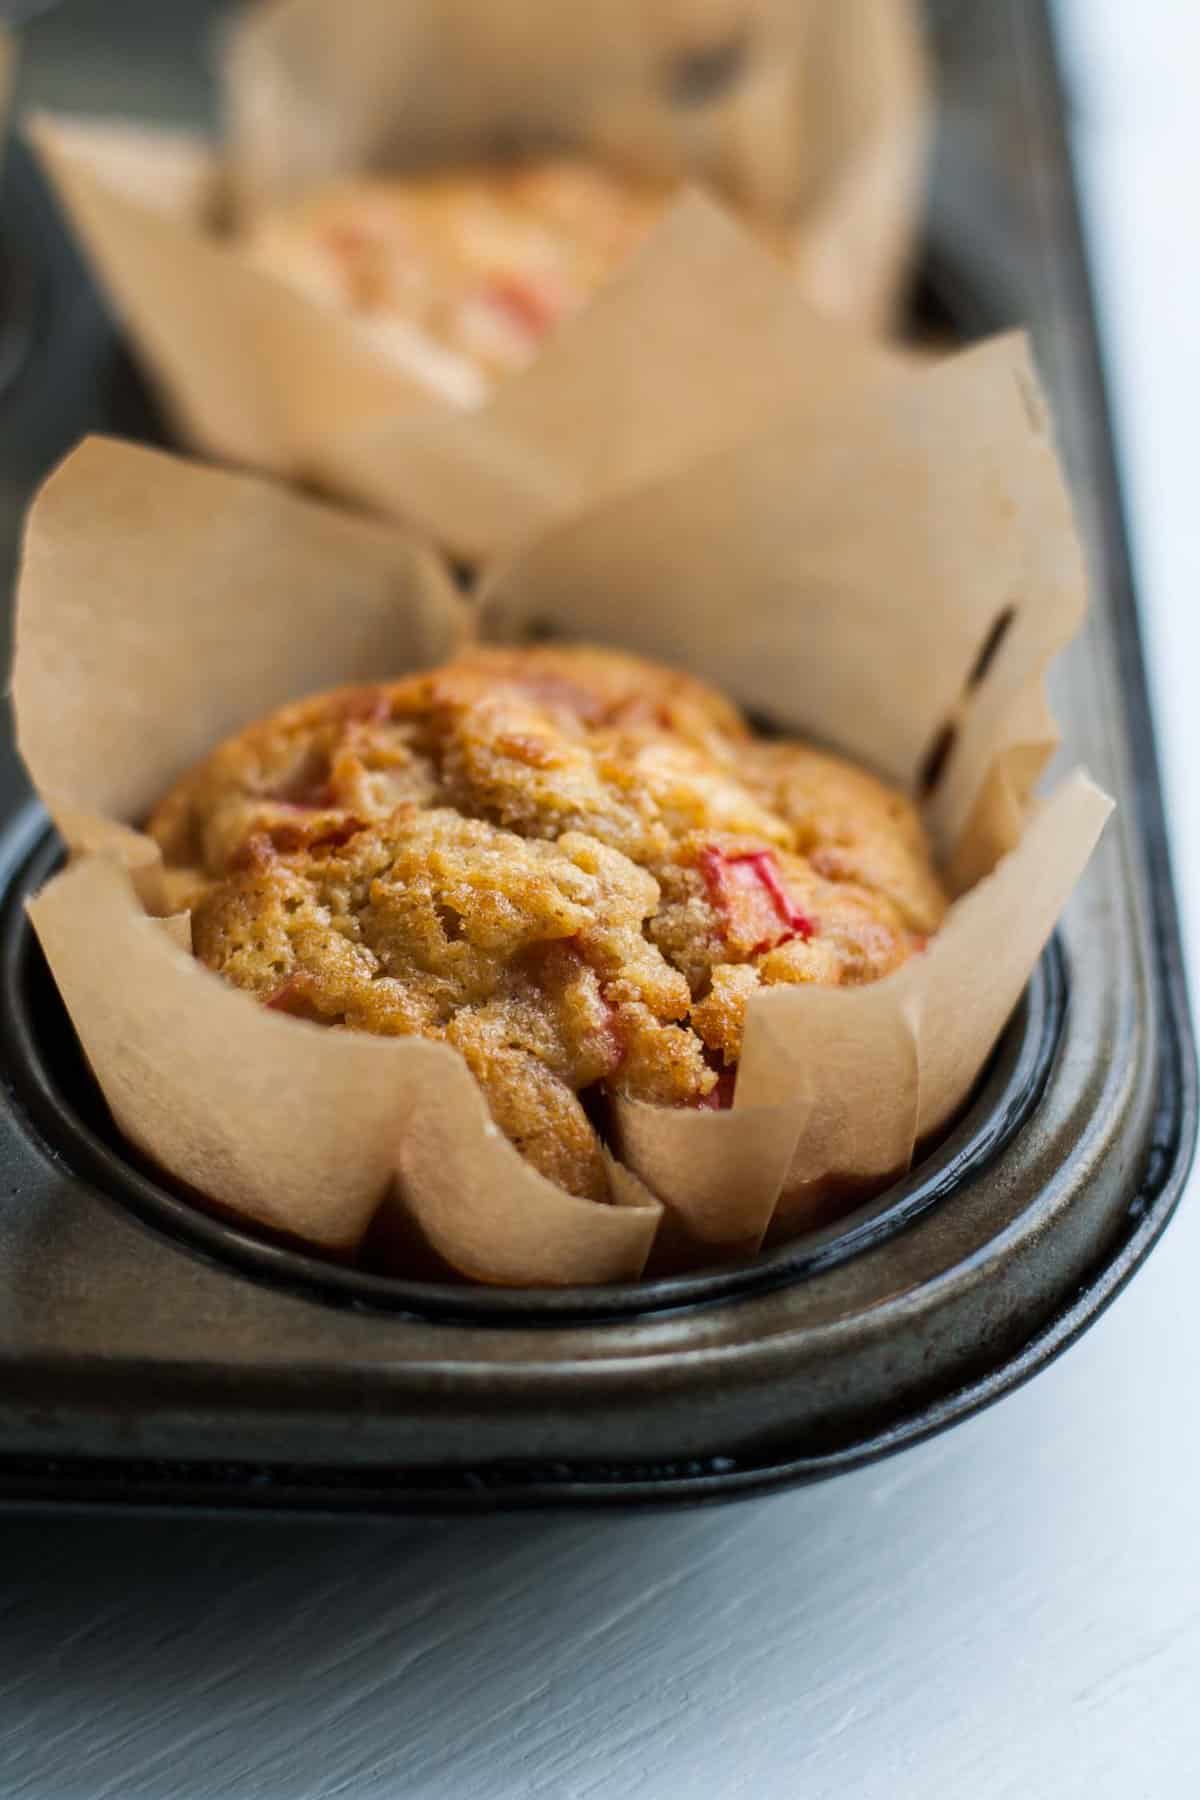 Blood Orange Rhubarb Muffins - these muffins are easy to make, full of delicious seasonal fruit and are perfect for breakfast! | eatloveeats.com